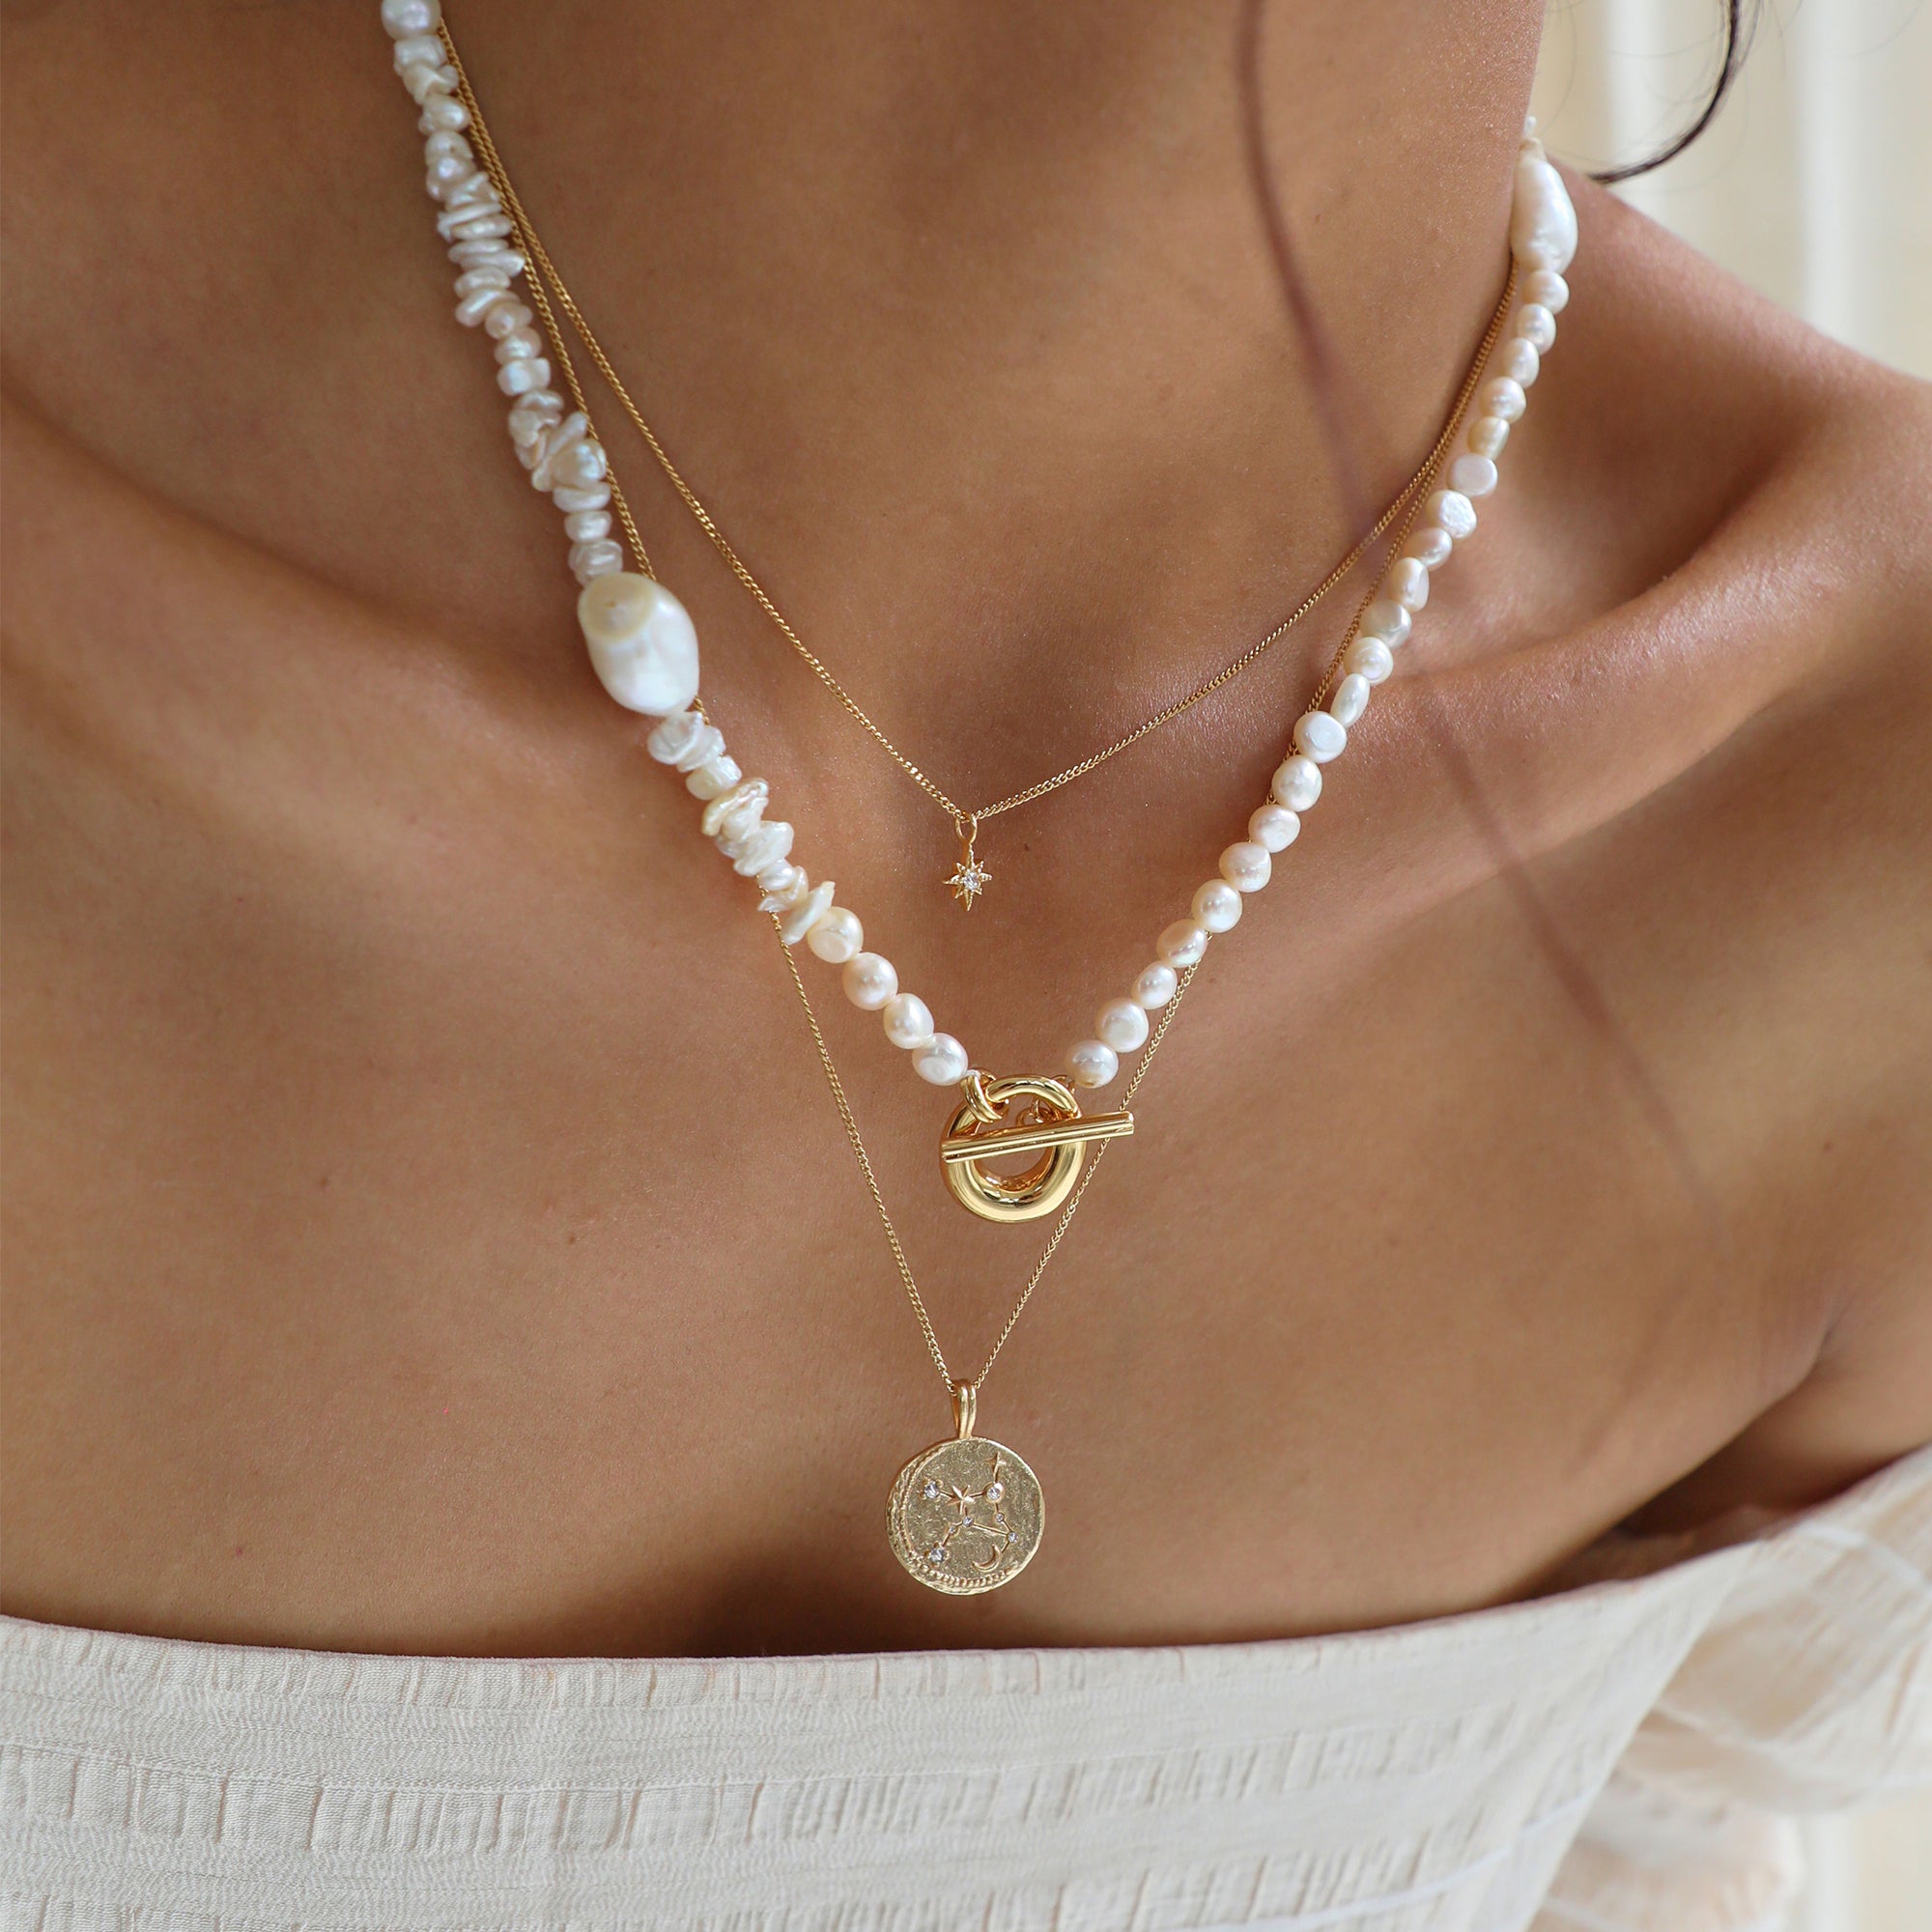 Necklace Stacking Image Pearl T Bar Necklace, Zodiac Necklace, Solid Gold Twilight Pendant